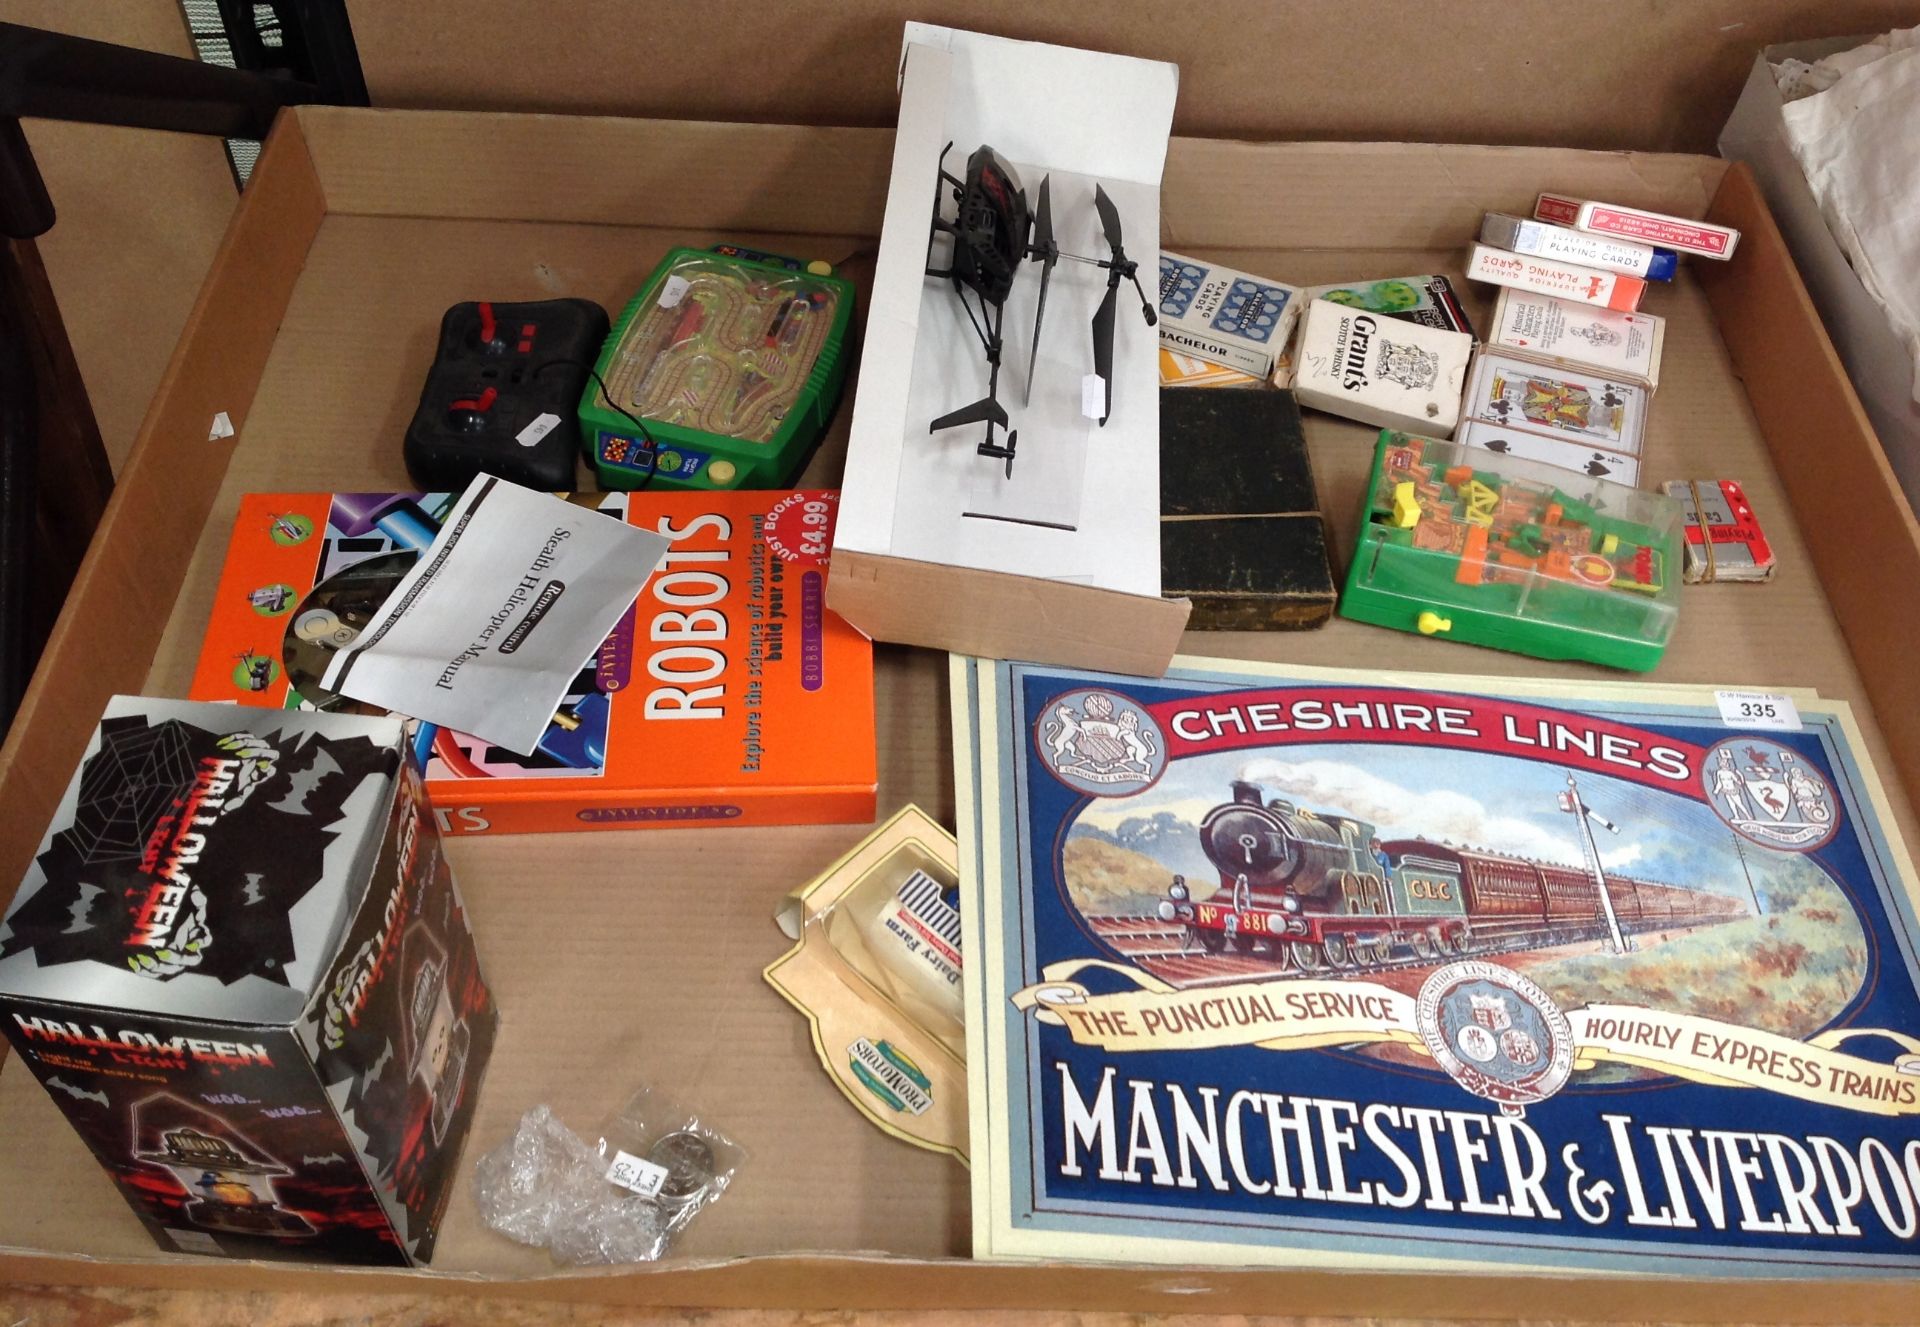 Contents to tray - card games, tin plate sign, remote control helicopter etc.